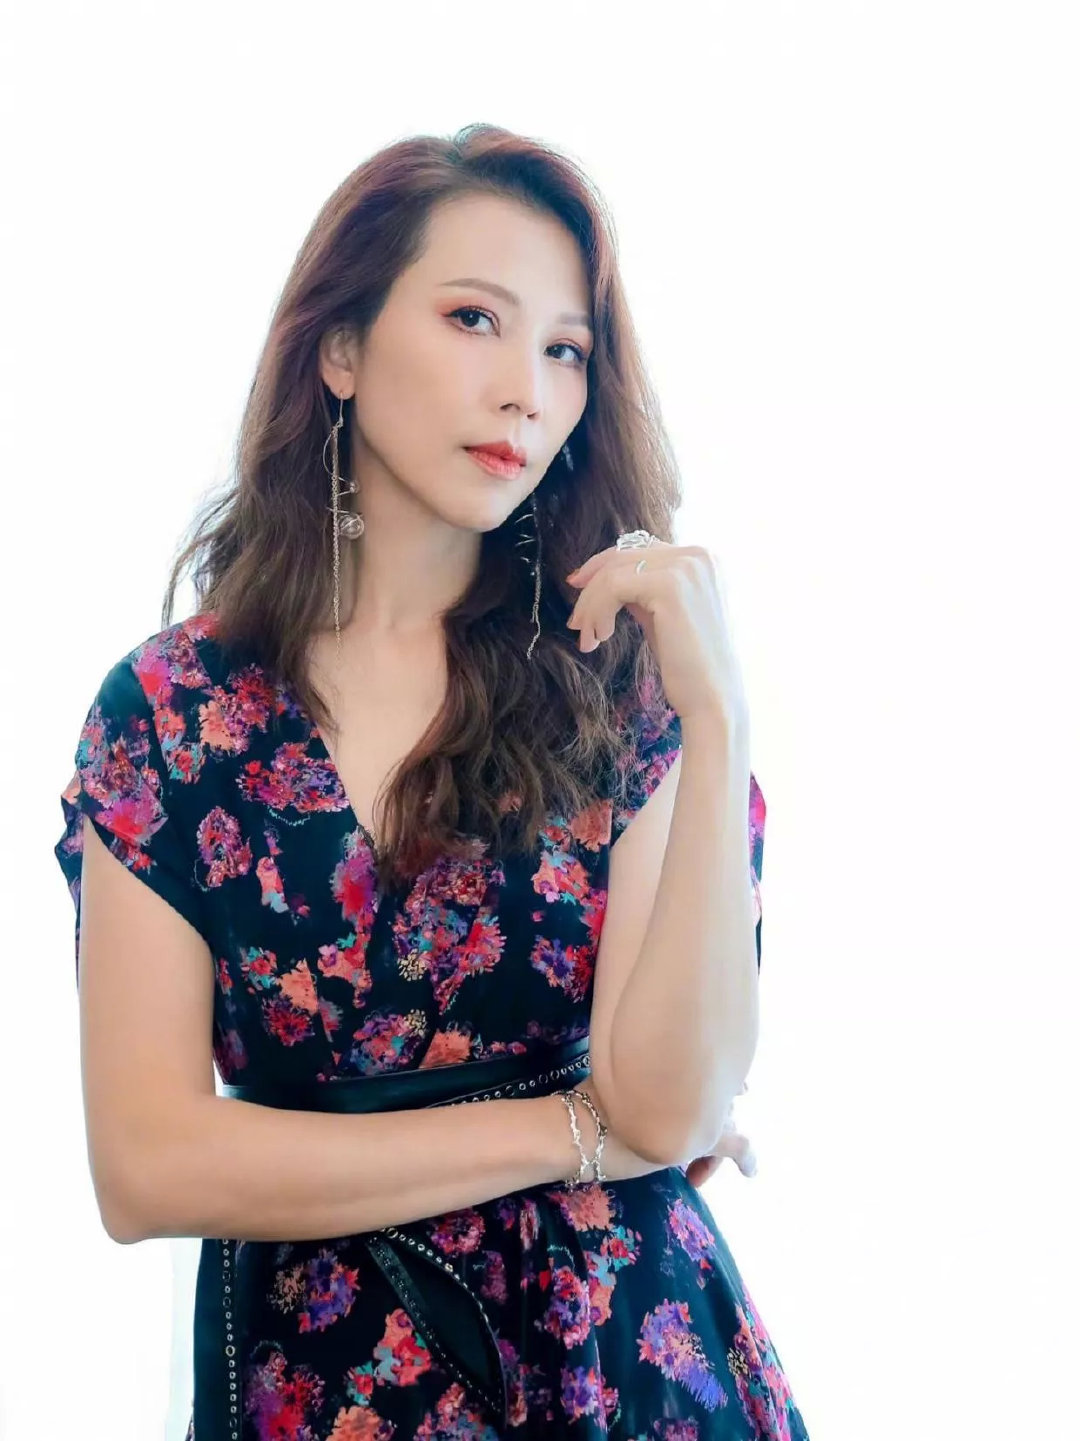 48 Year Old Cai Shaofen S Figure Is Still Very Hot And Her Floral Dress Is Successfully Dressed